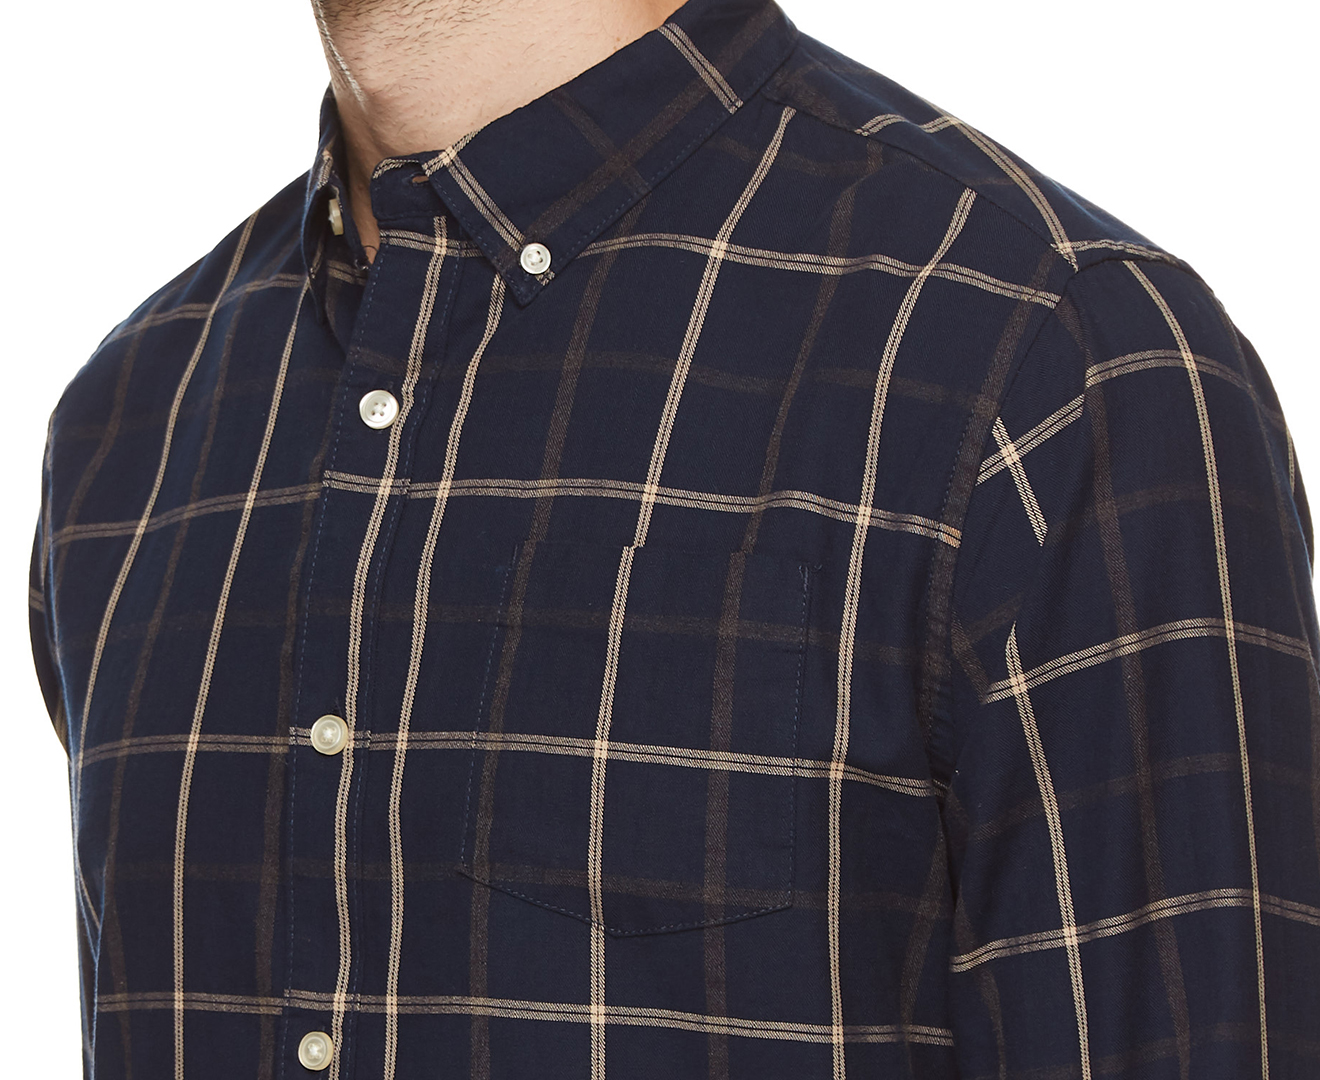 Common People Men's Eagle Long Sleeve Shirt - Navy | Catch.co.nz